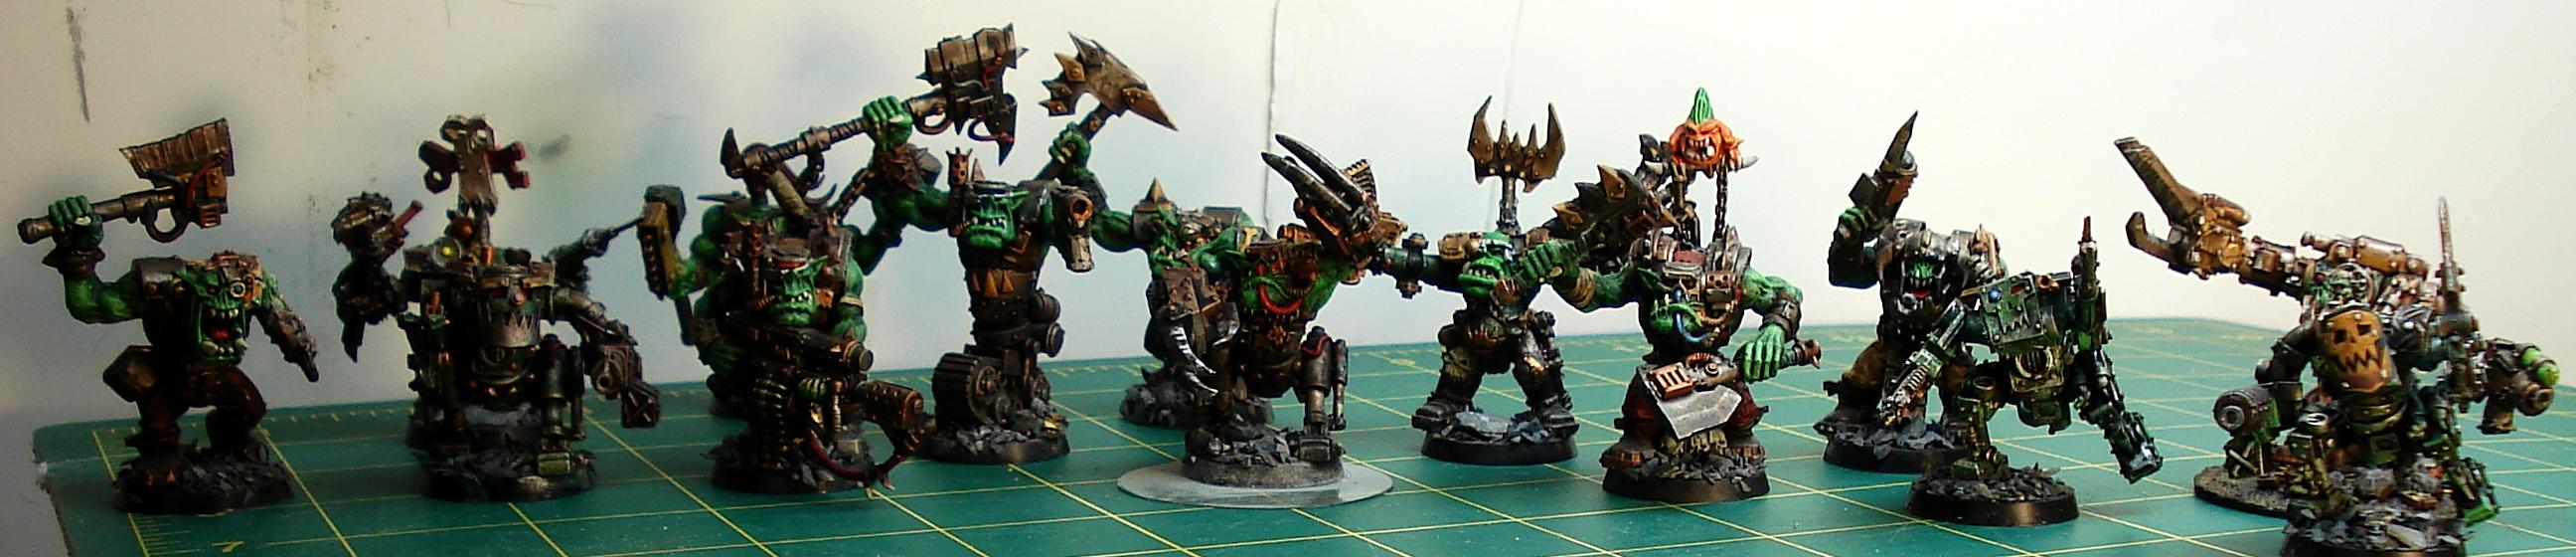 Bad, Claw, Comission, Custom, Deff, Dreadnought, Field, Force, Kustom, Moons, Orks, Space, Space Marines